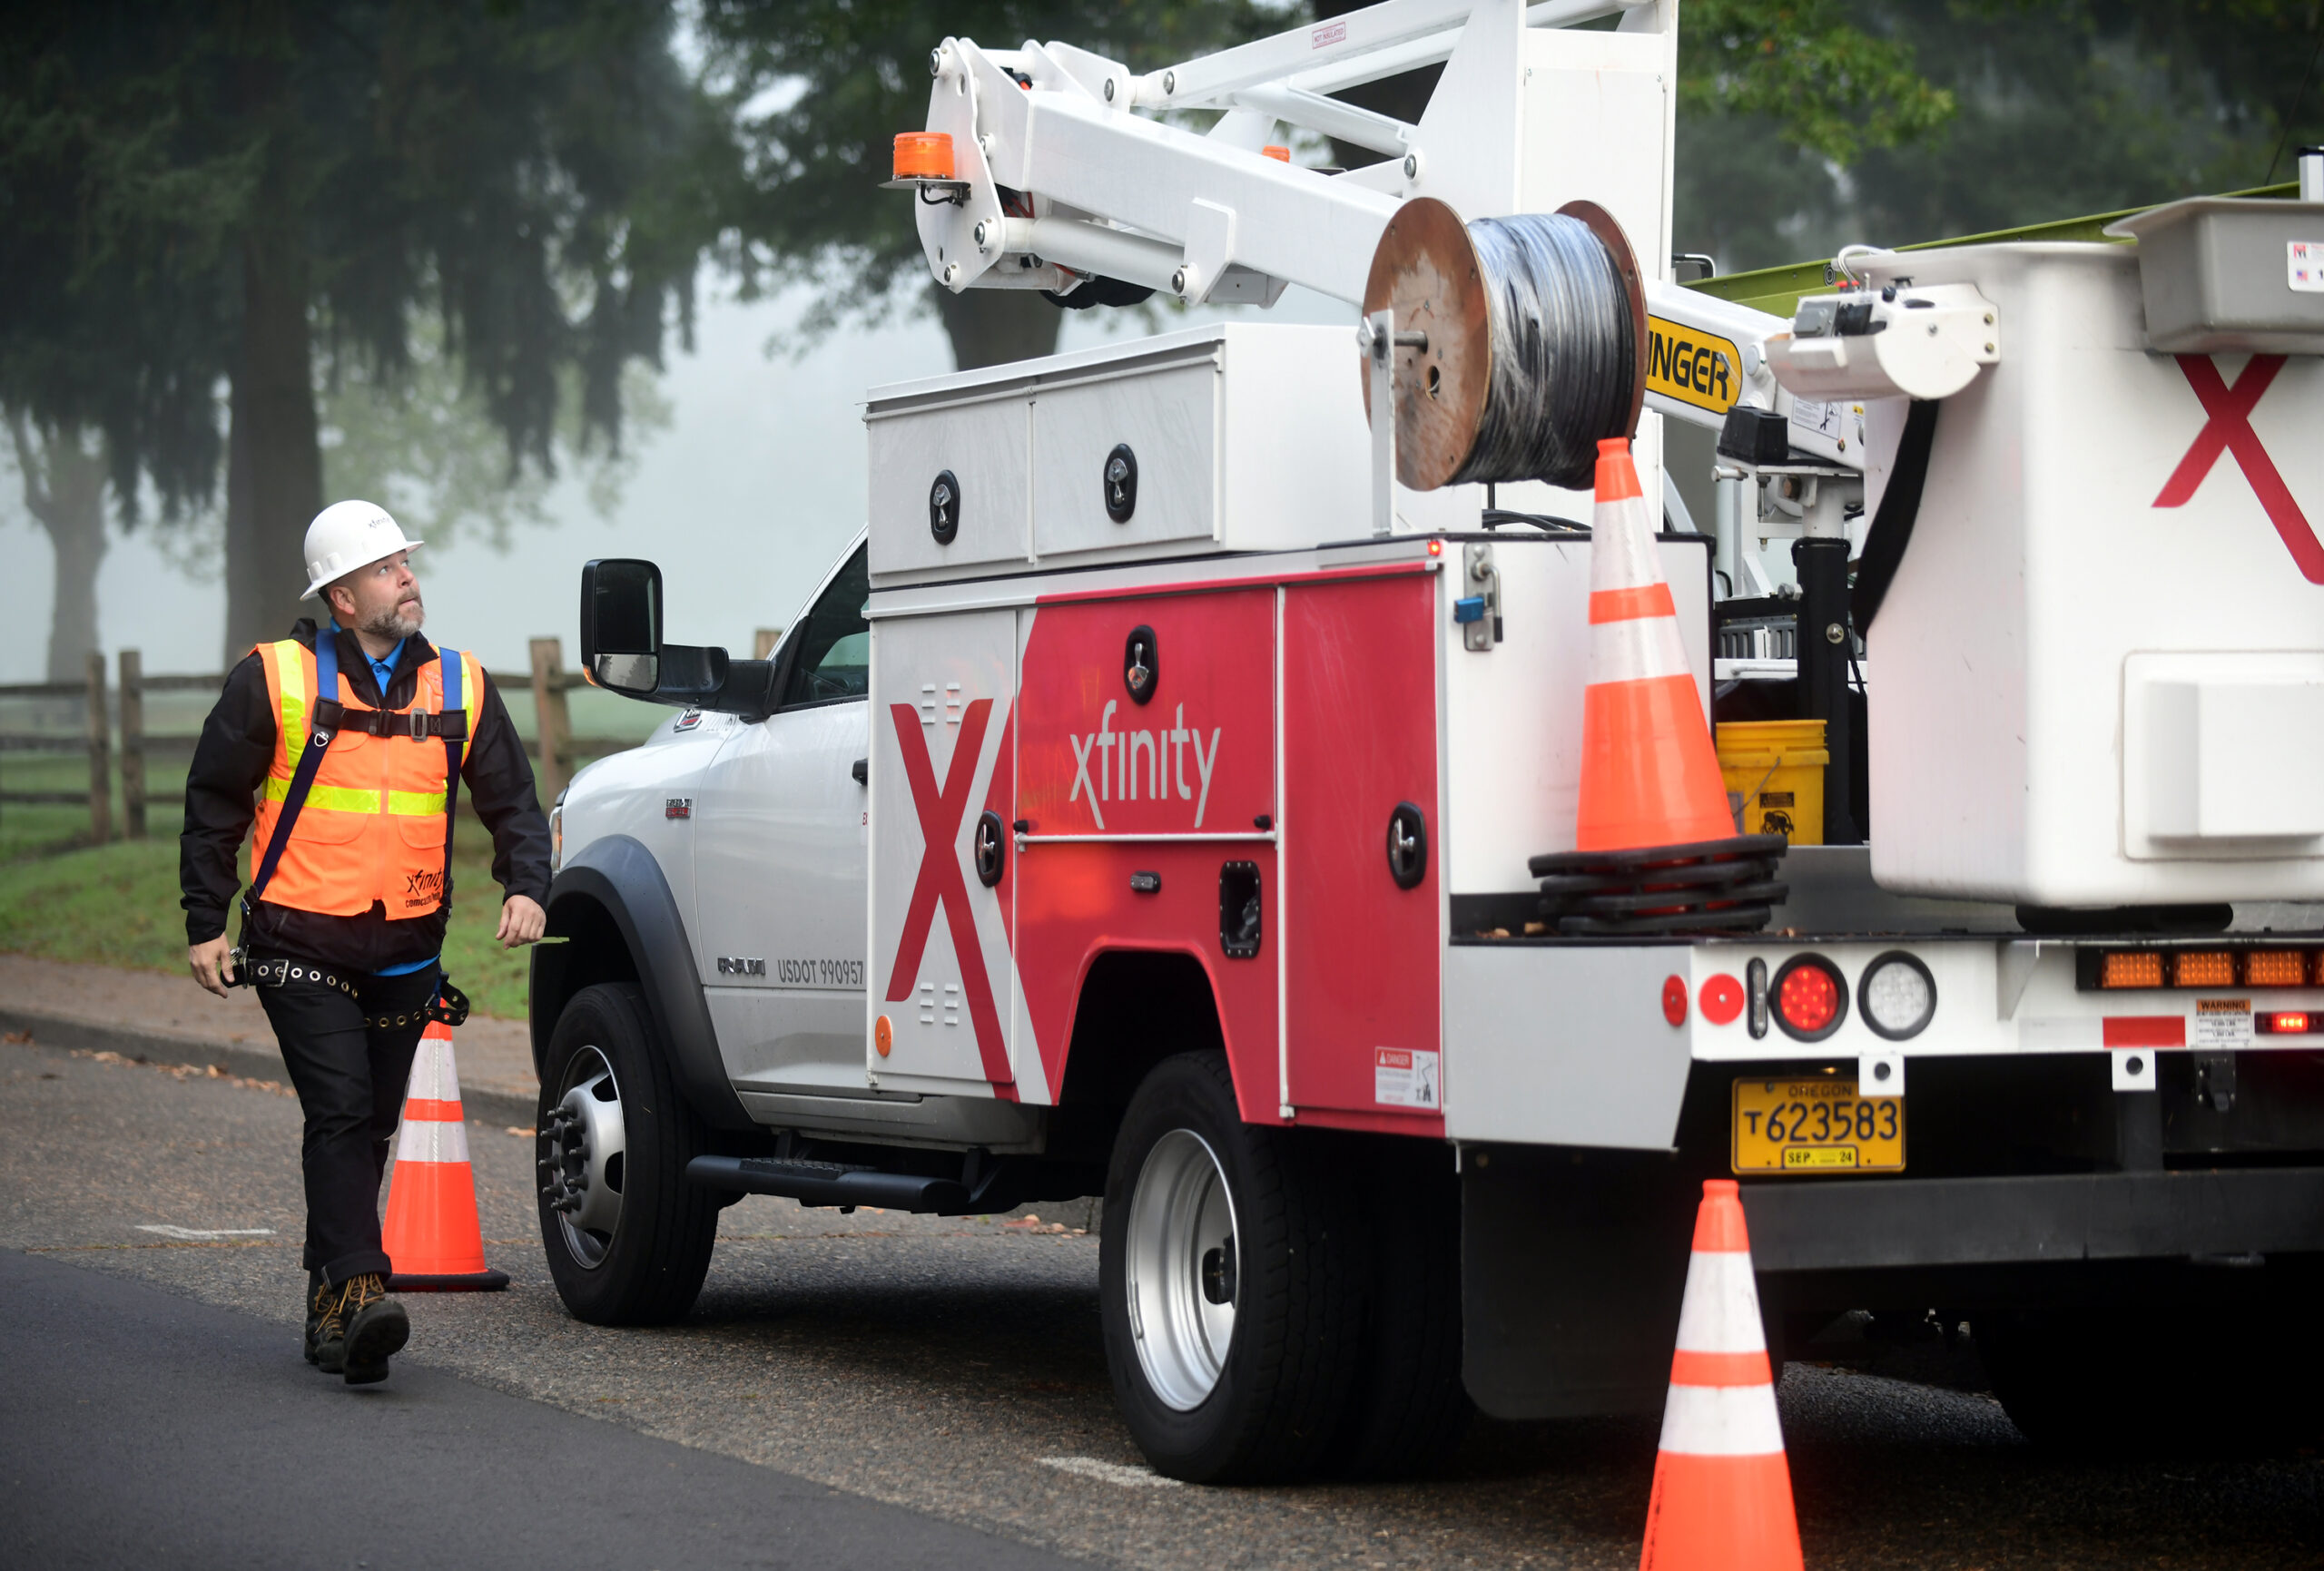 Comcast Expands High-Speed Internet to Rural Clark County